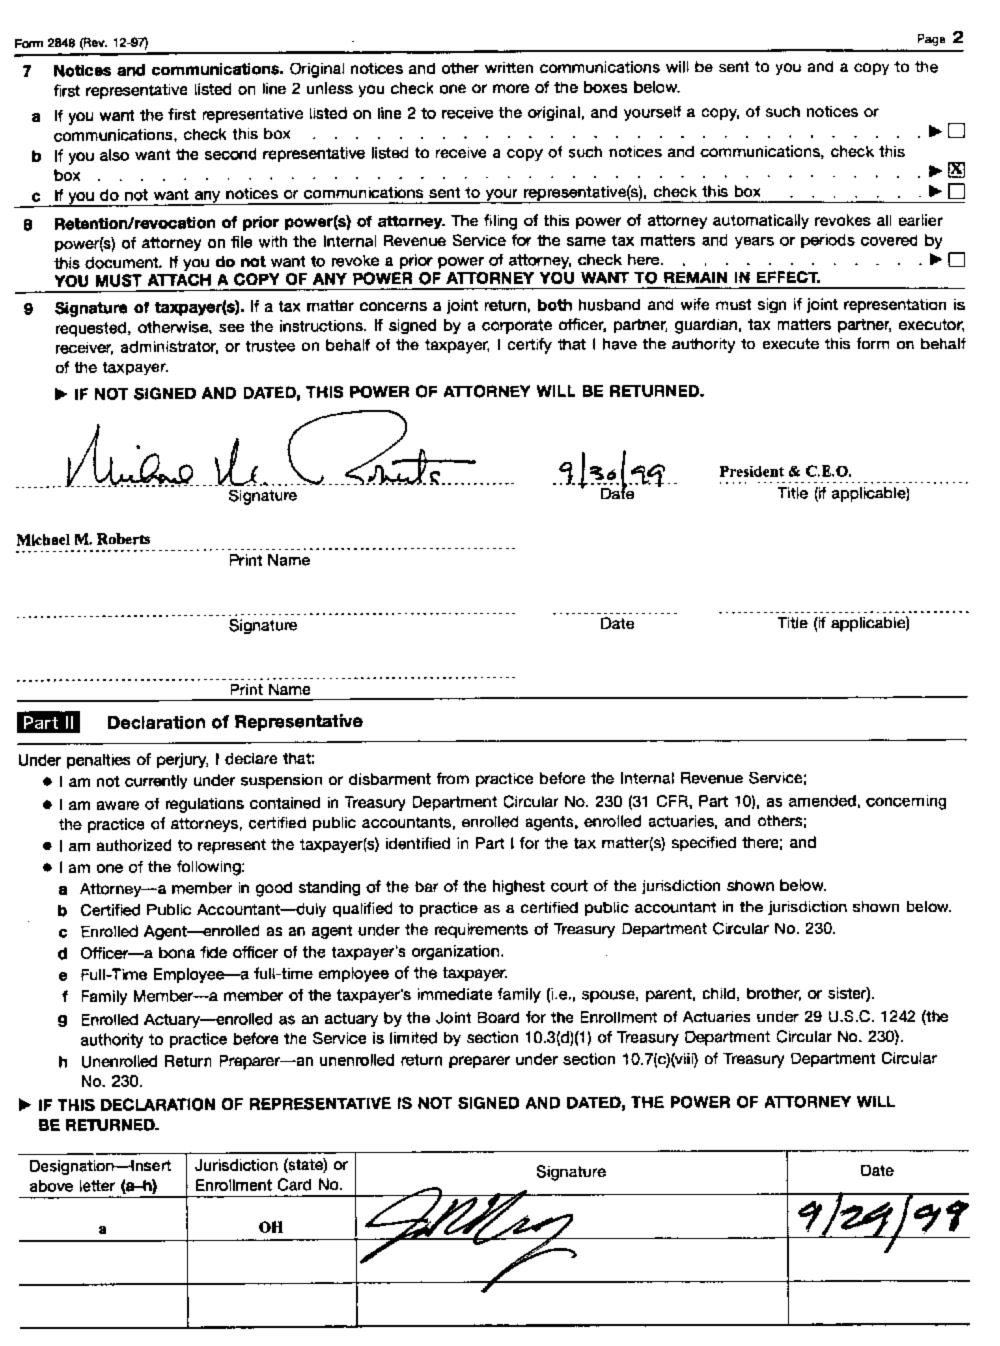 Form 2848 Power of Attorney and Declaration of Representative (Page 2)